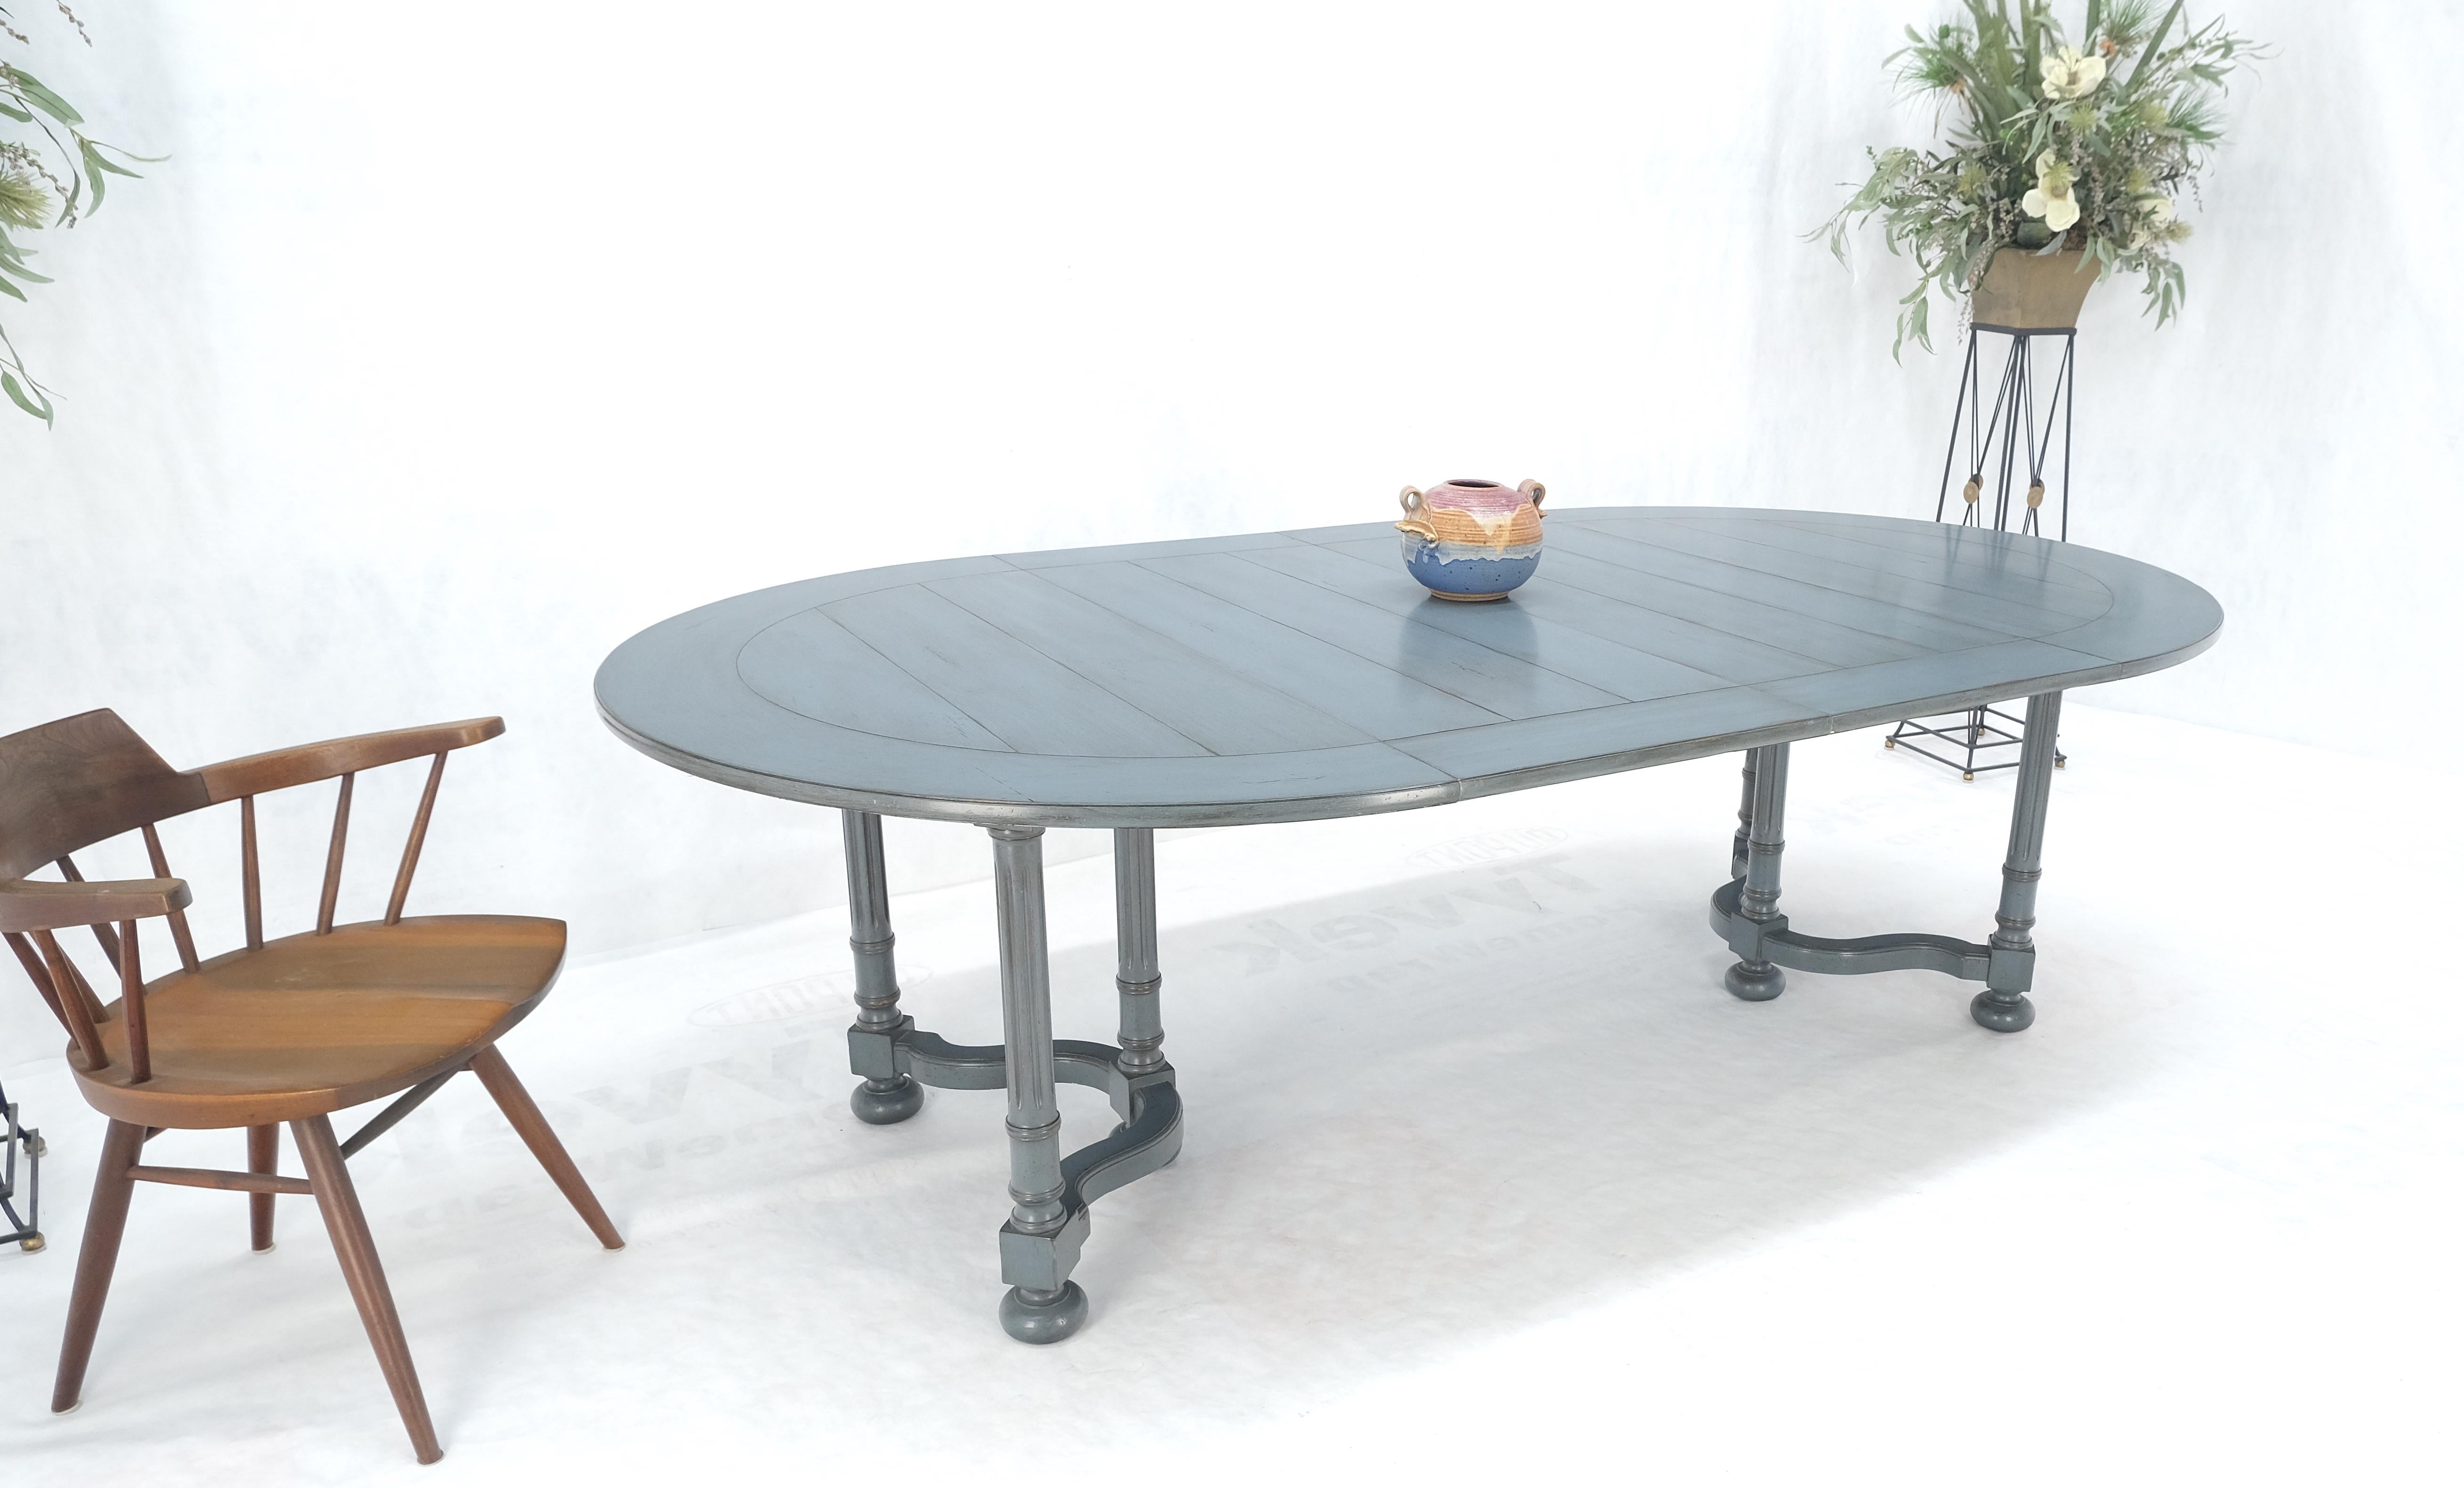 Baker Round Blue Grey Wash Milk Paint Style Finish Dining Table 2 Leaves MINT! For Sale 3